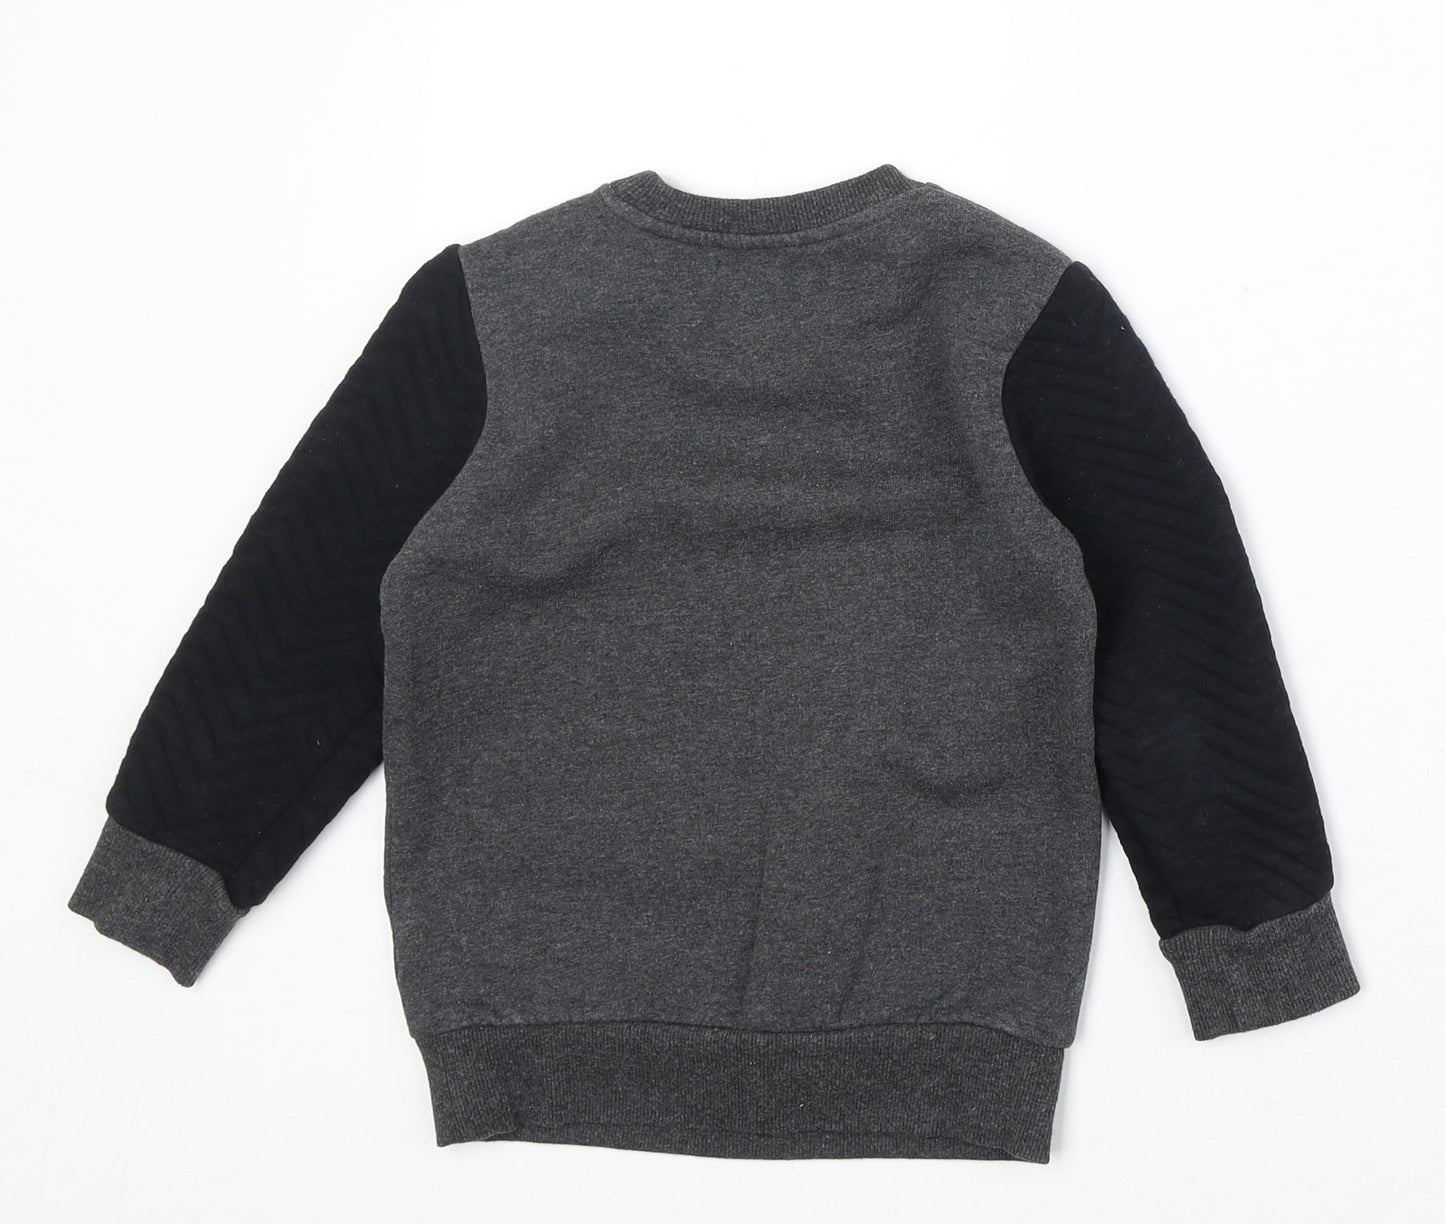 Mini V Boys Grey Cotton Pullover Sweatshirt Size 3-4 Years Pullover - Cool